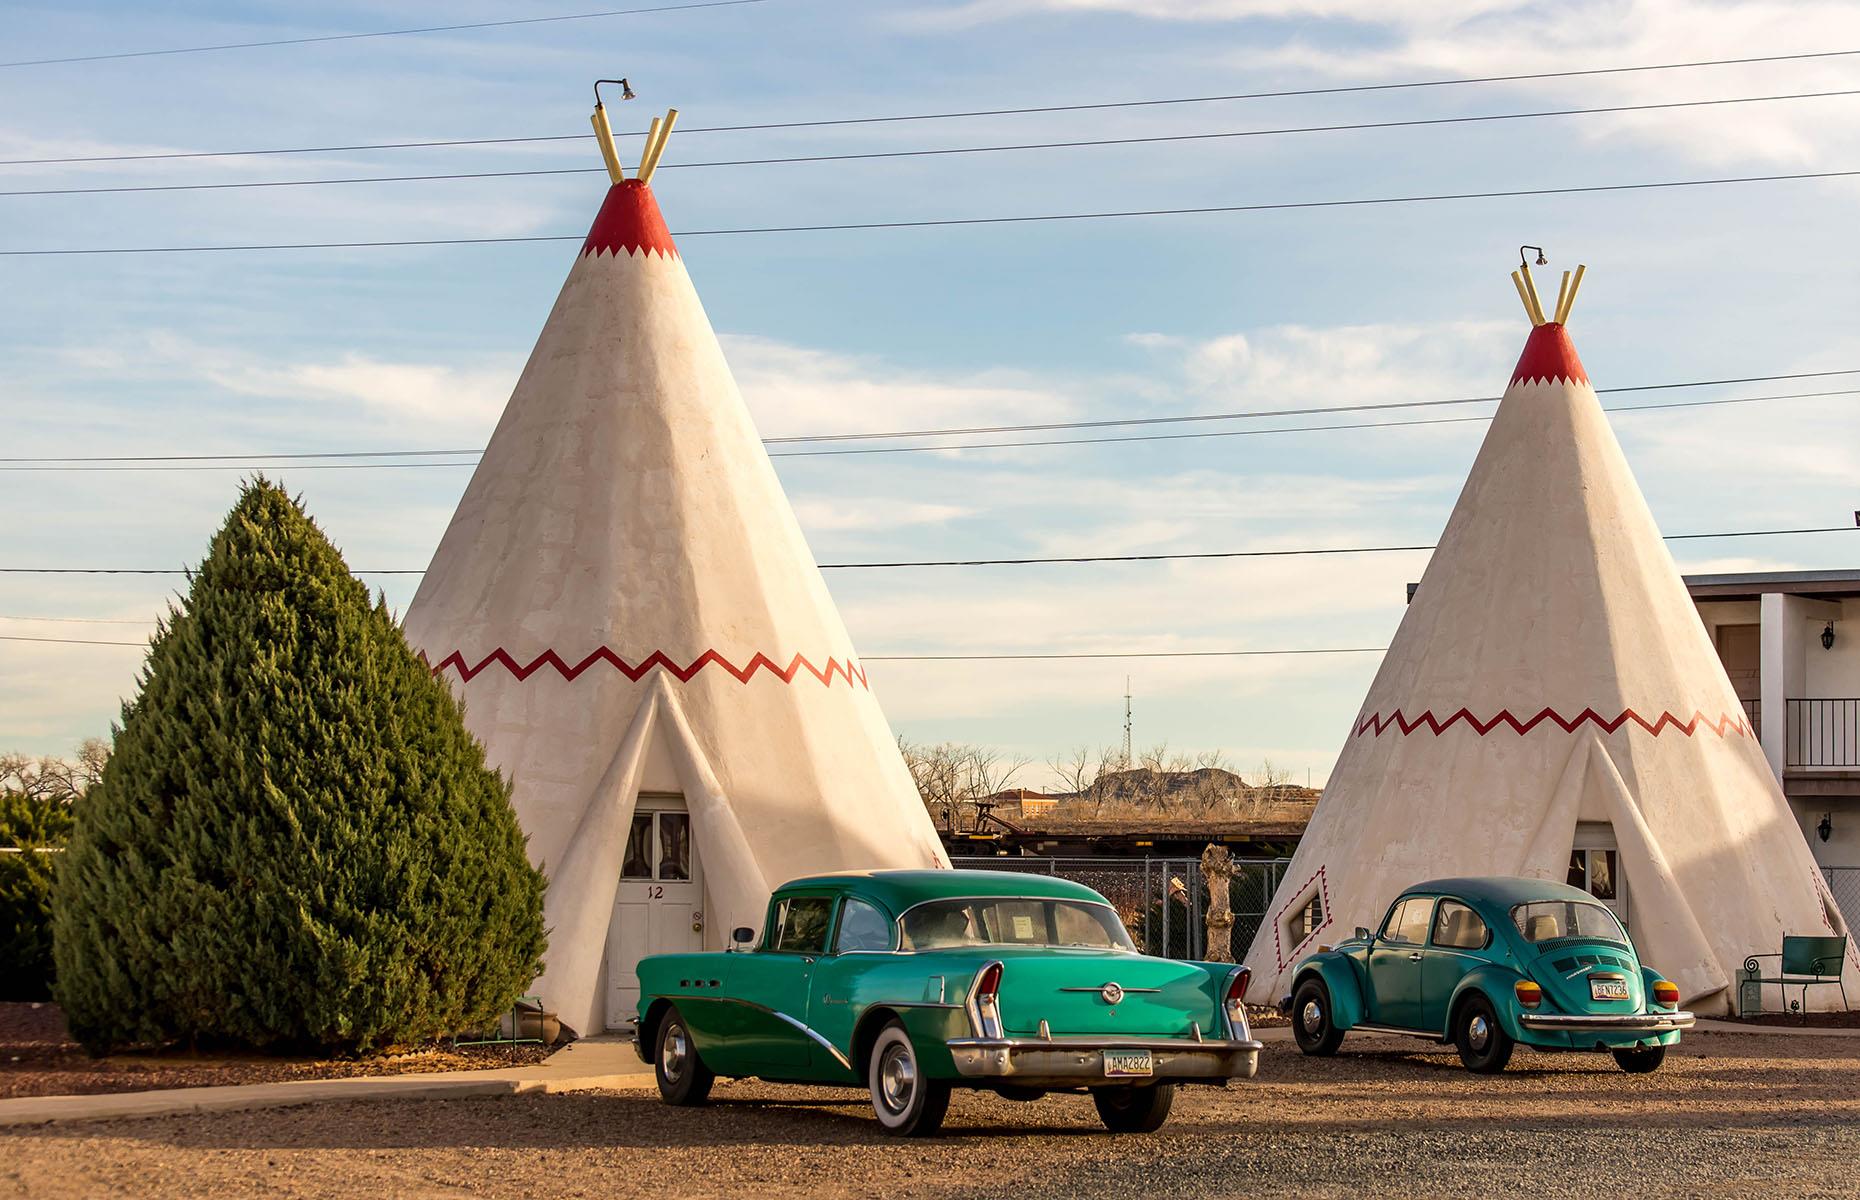 <p>Wild West fans should head to Holbrook, Arizona. Take a walk up Holbrook’s Bucket of Blood street, so named because two rival groups of cowboys had a bloody shoot-out here in 1886. Stay in one of the giant wigwams at the quirky <a href="http://sleepinawigwam.com/">Wigwam Motel</a>, somewhere you can expect oodles of character if not luxury.</p>